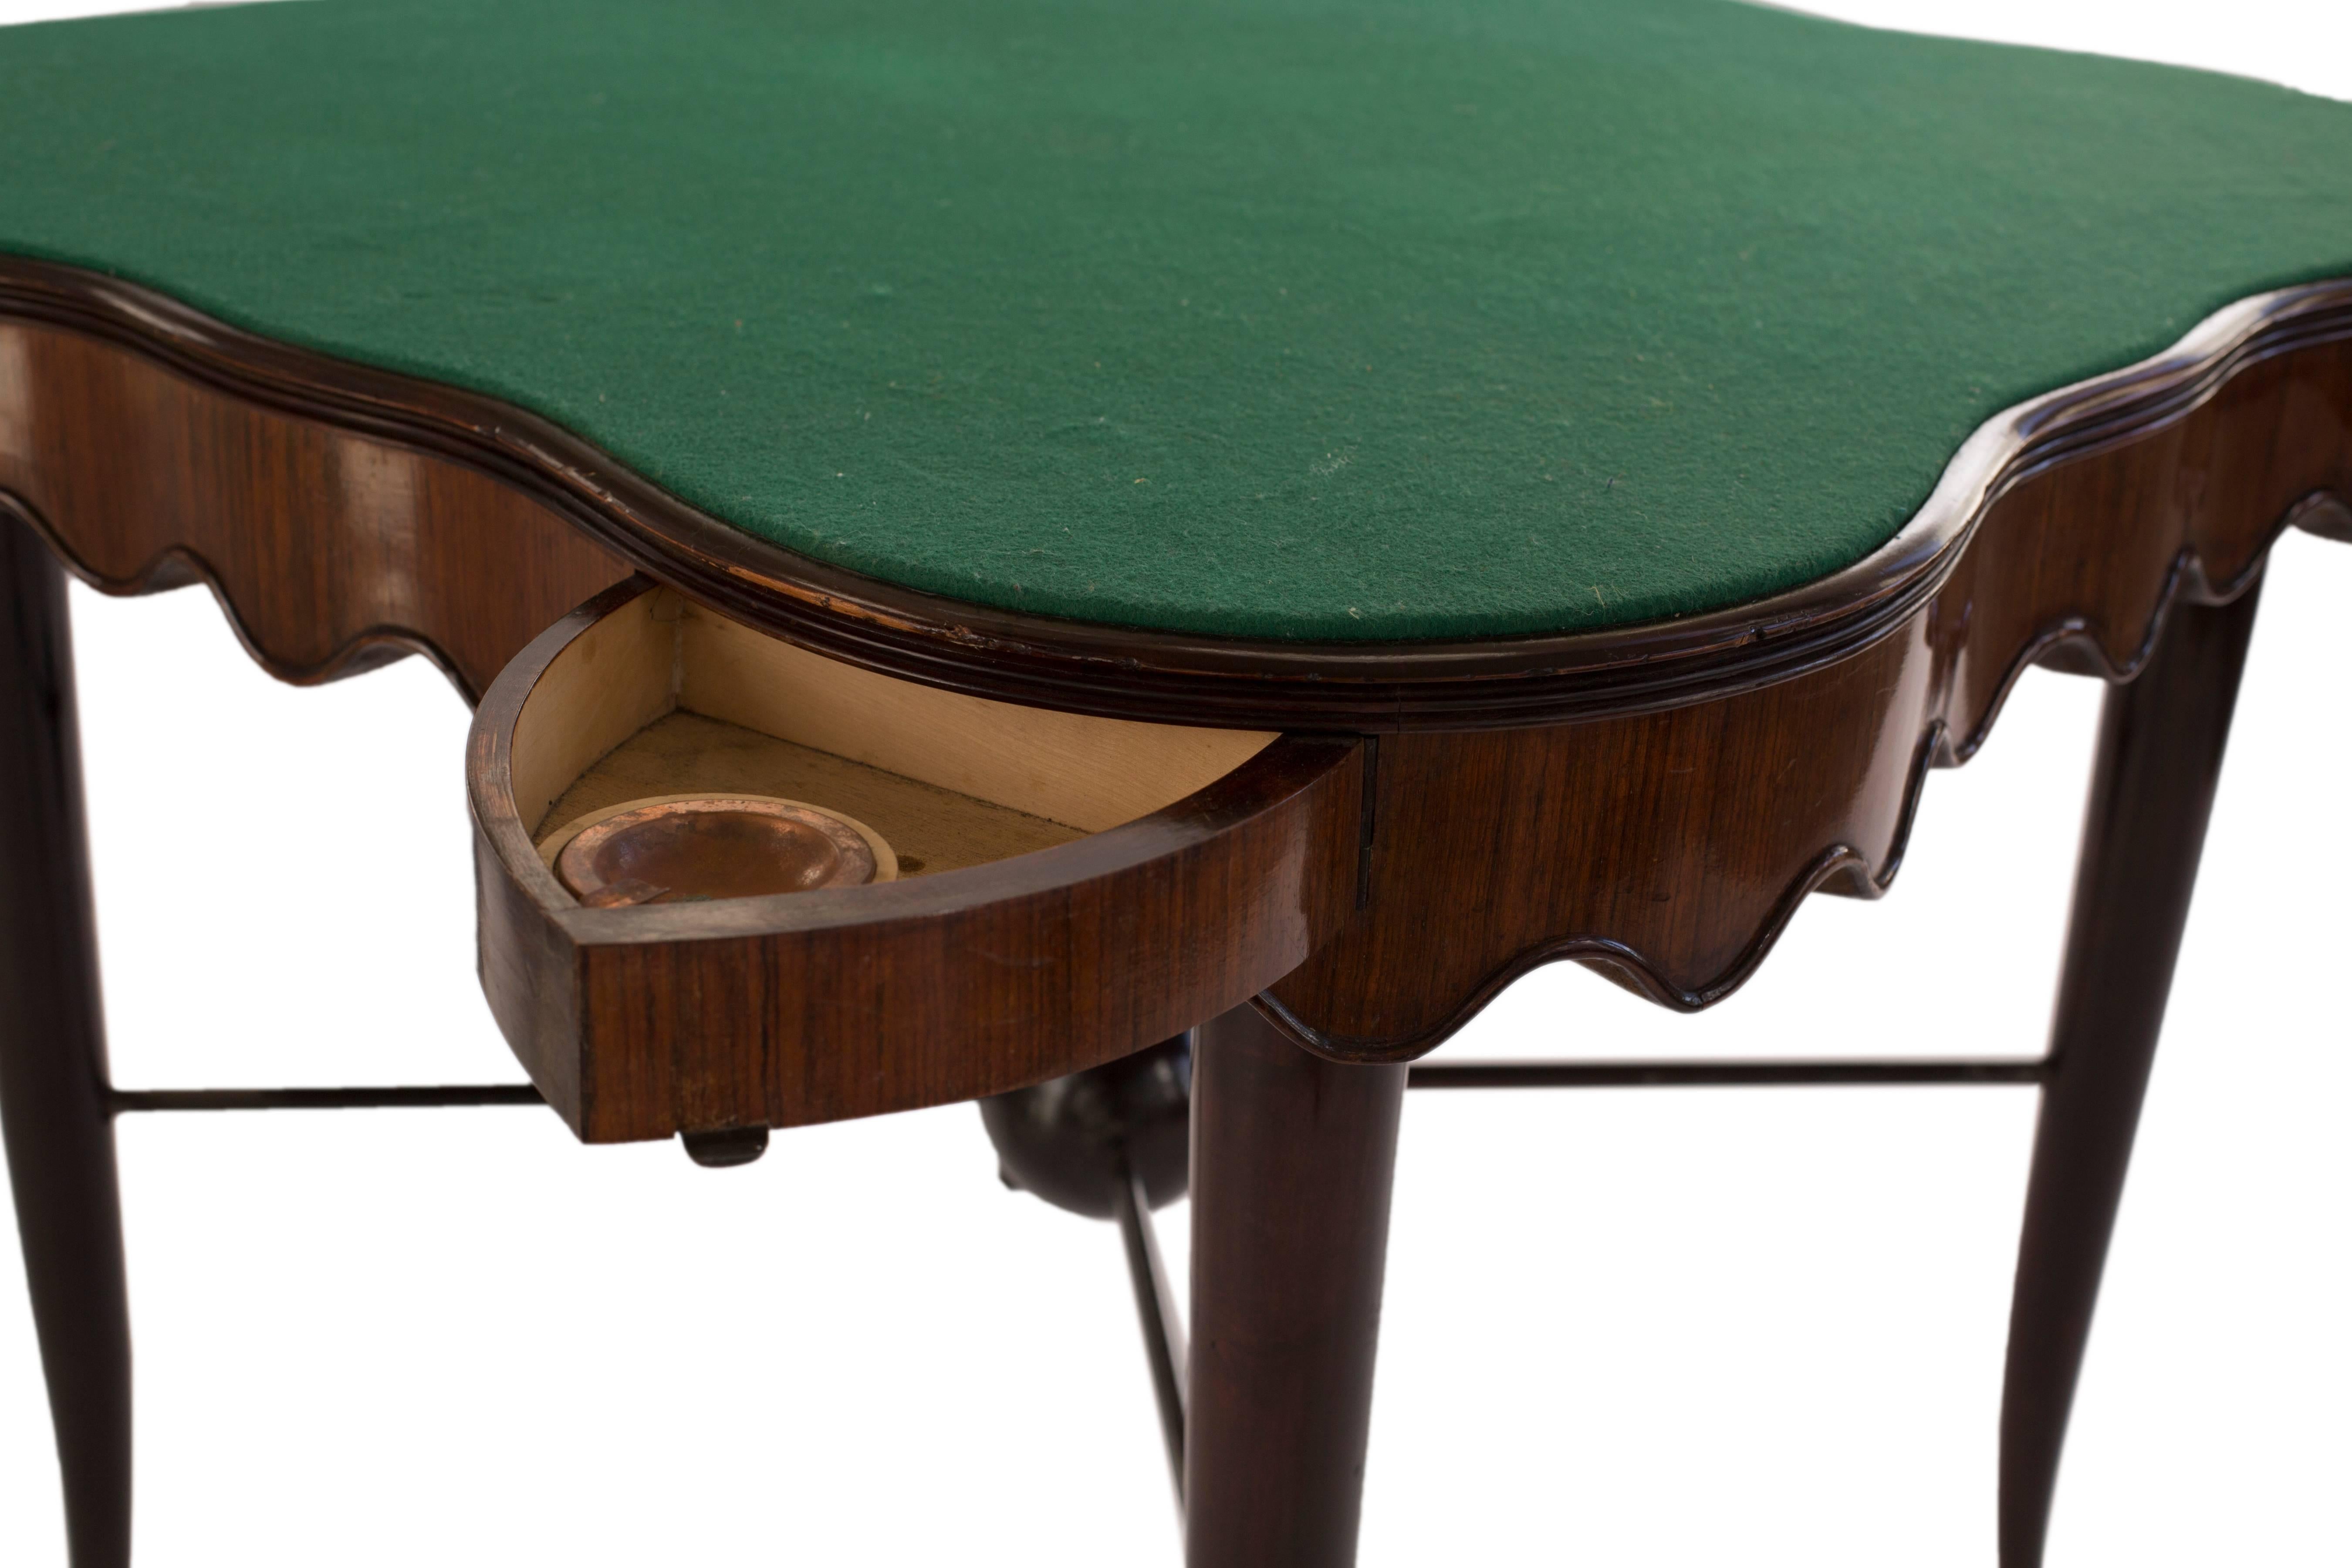 Unusual Art Deco continental gaming table. It's undulating freeze reveals an integral drawer to each corner. The ebonized sable type legs are met with an 'X' frame stretcher terminating in a central spherical boss.